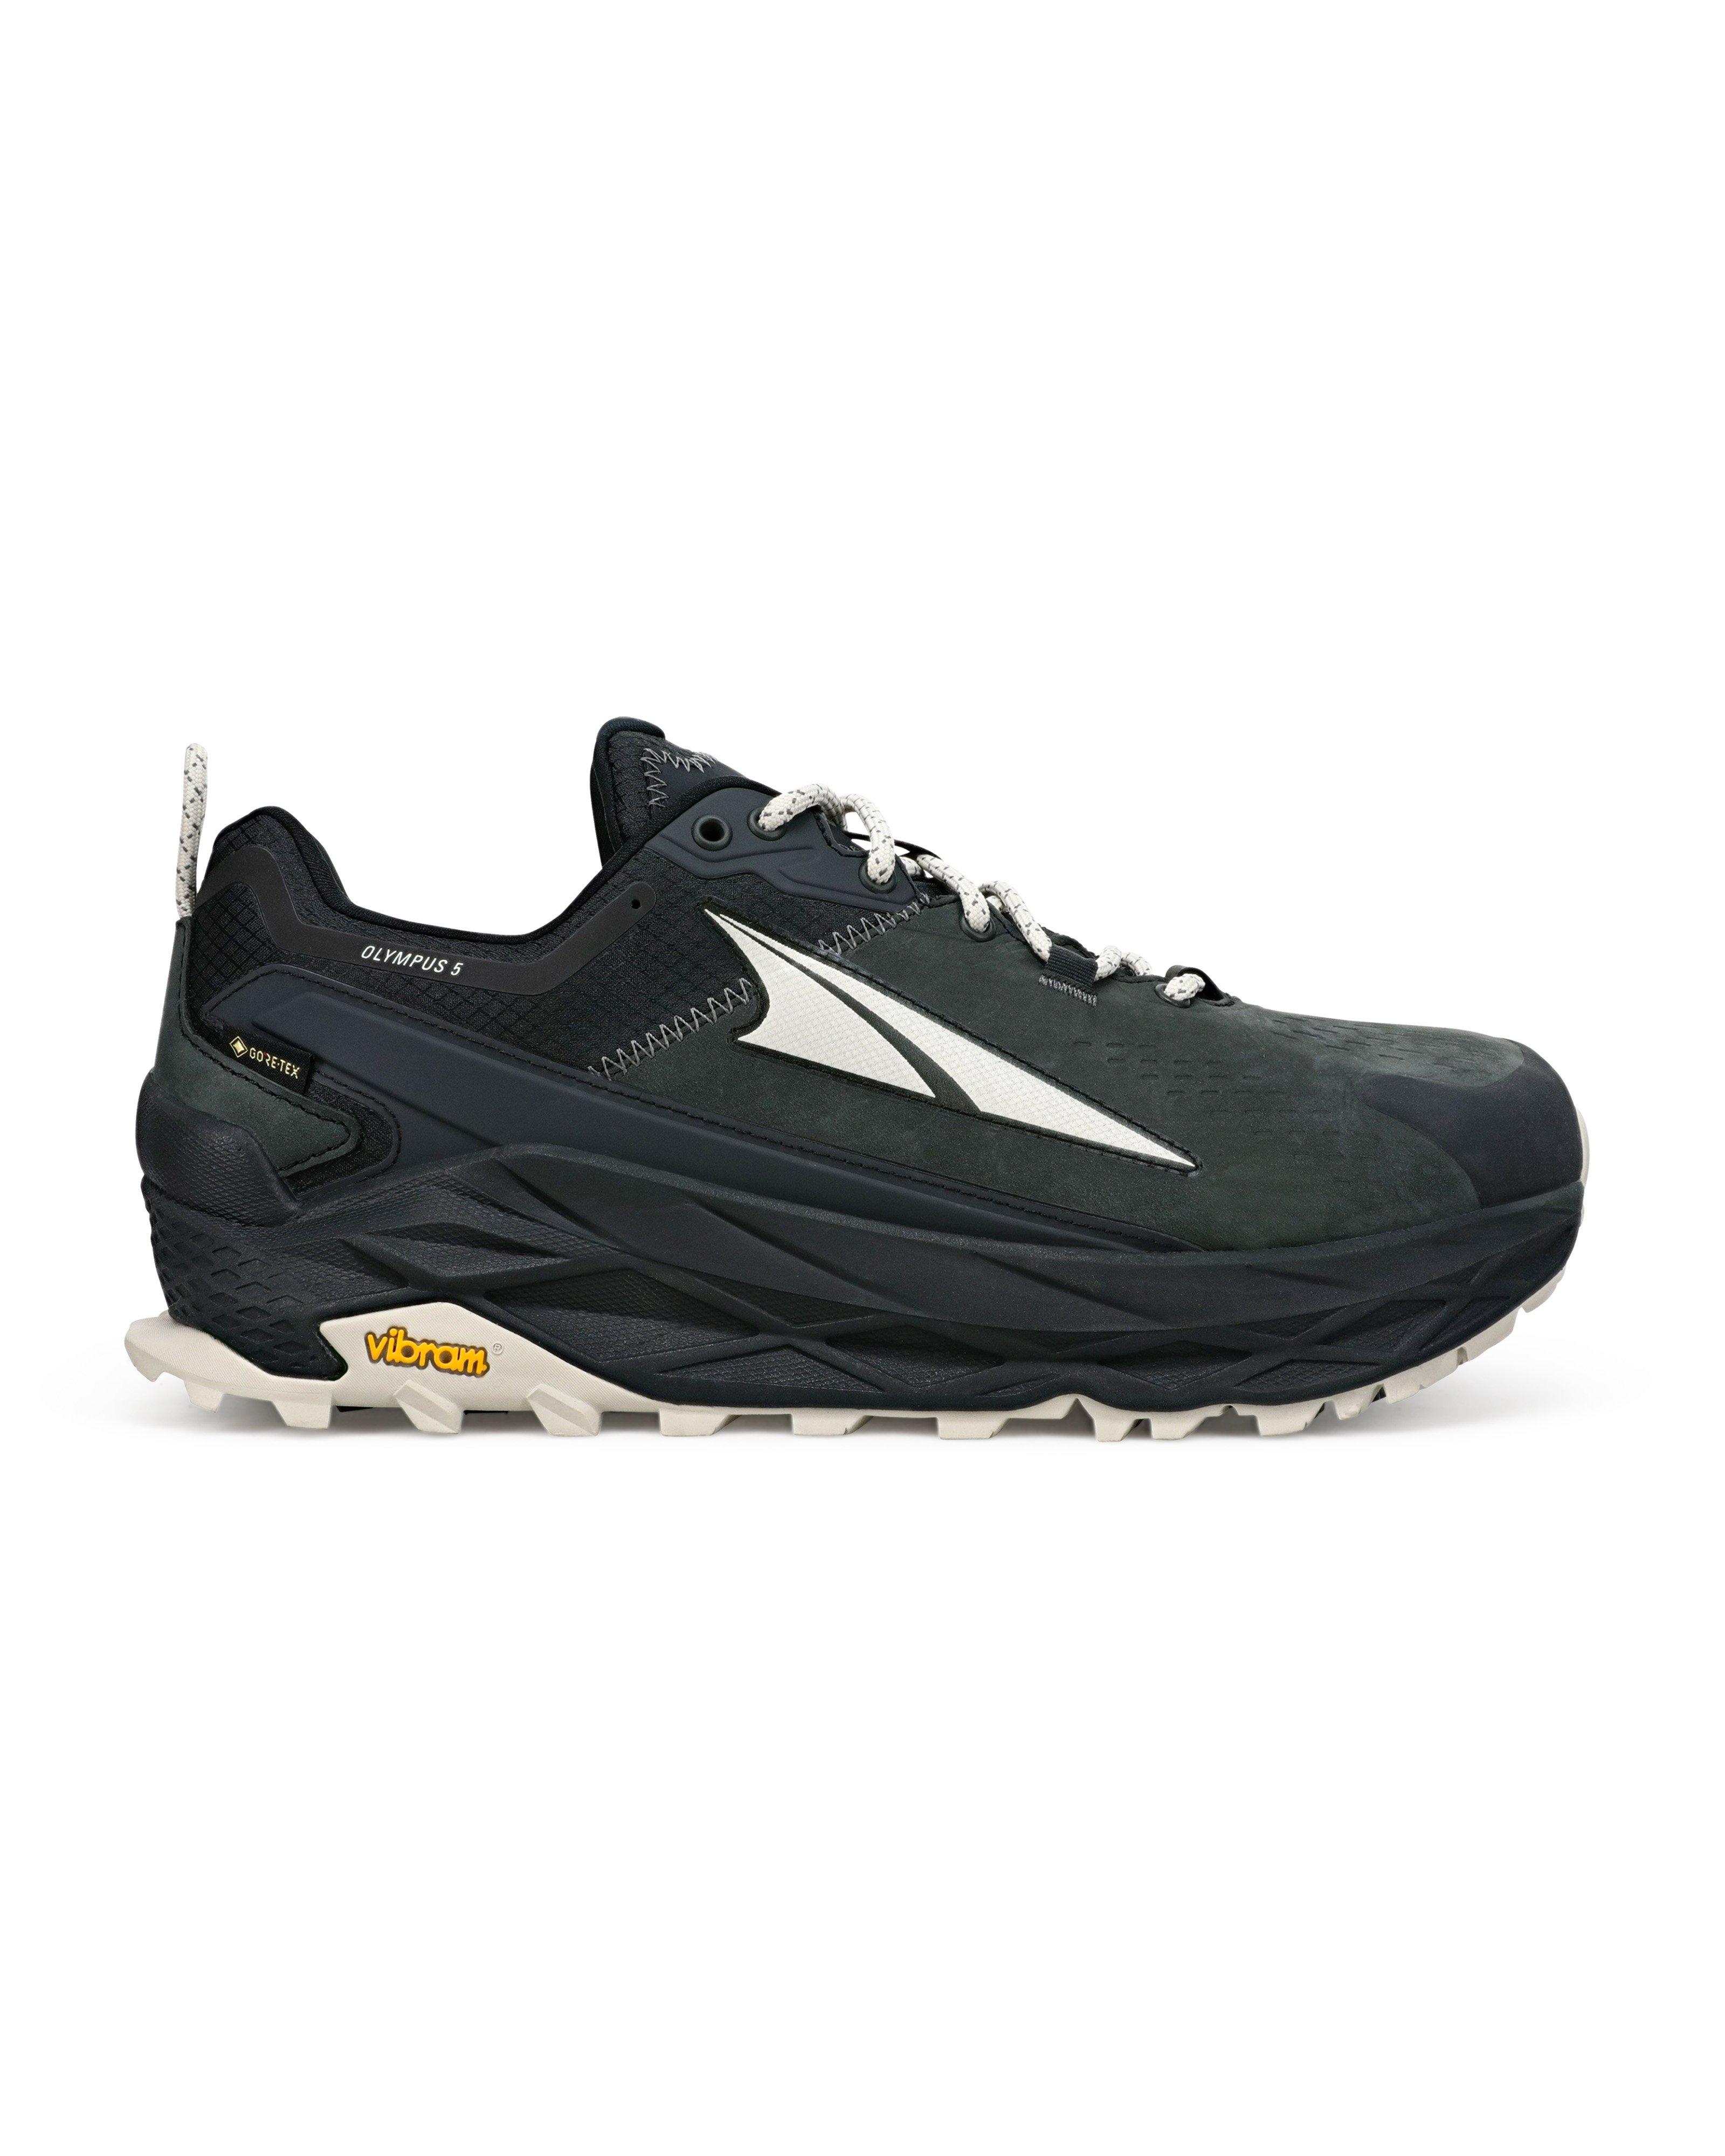 Altra Men’s Olympus 5 Trail Running Shoes | Cape Union Mart